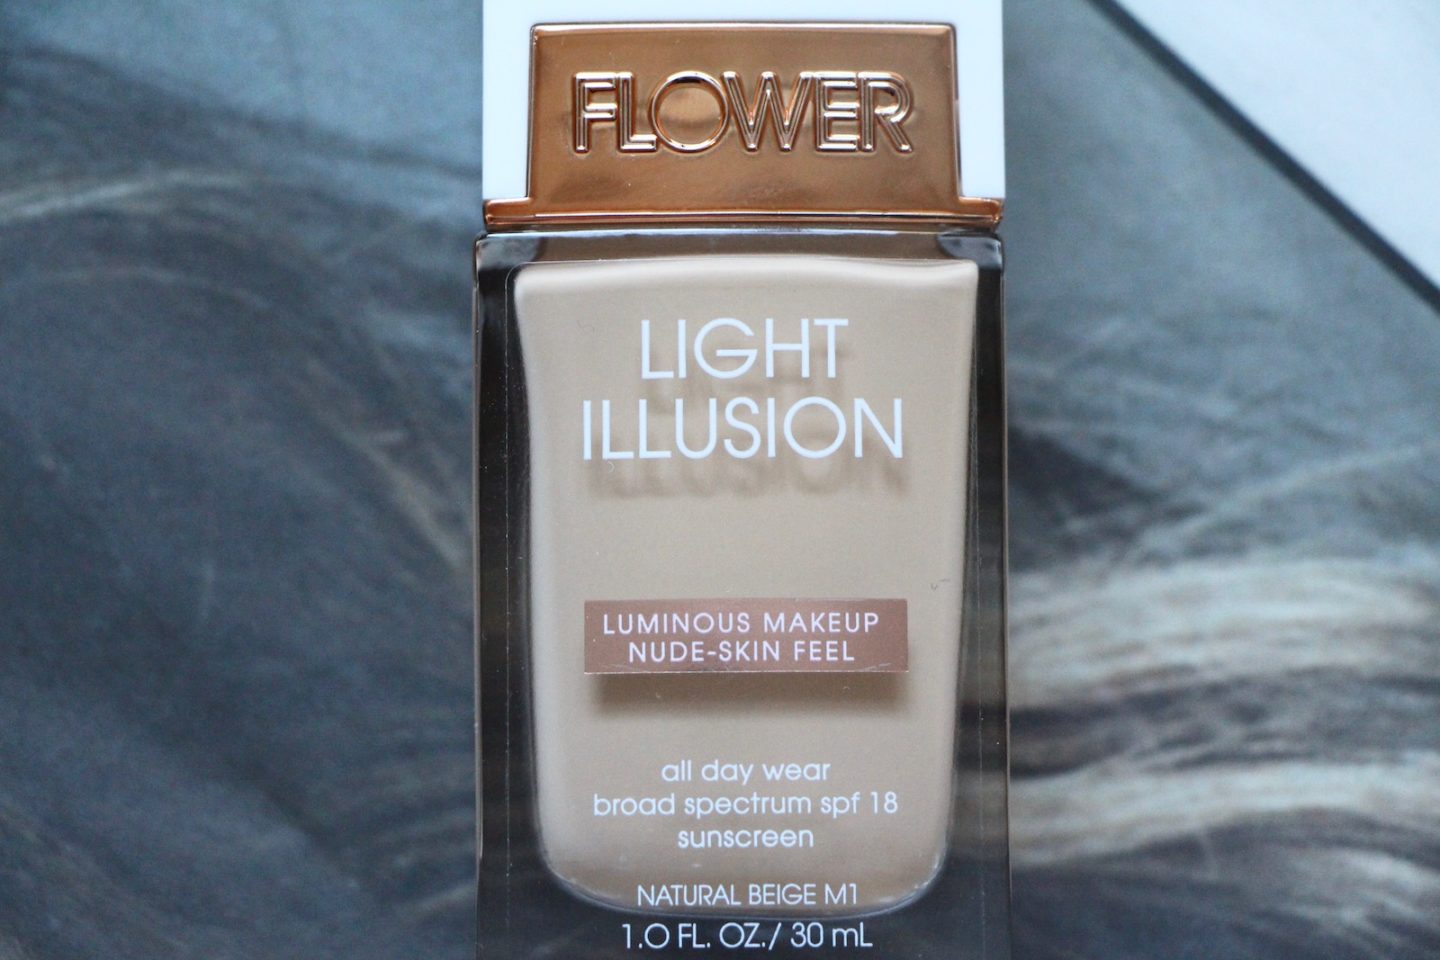 Flower Beauty Light Illusion foundation review